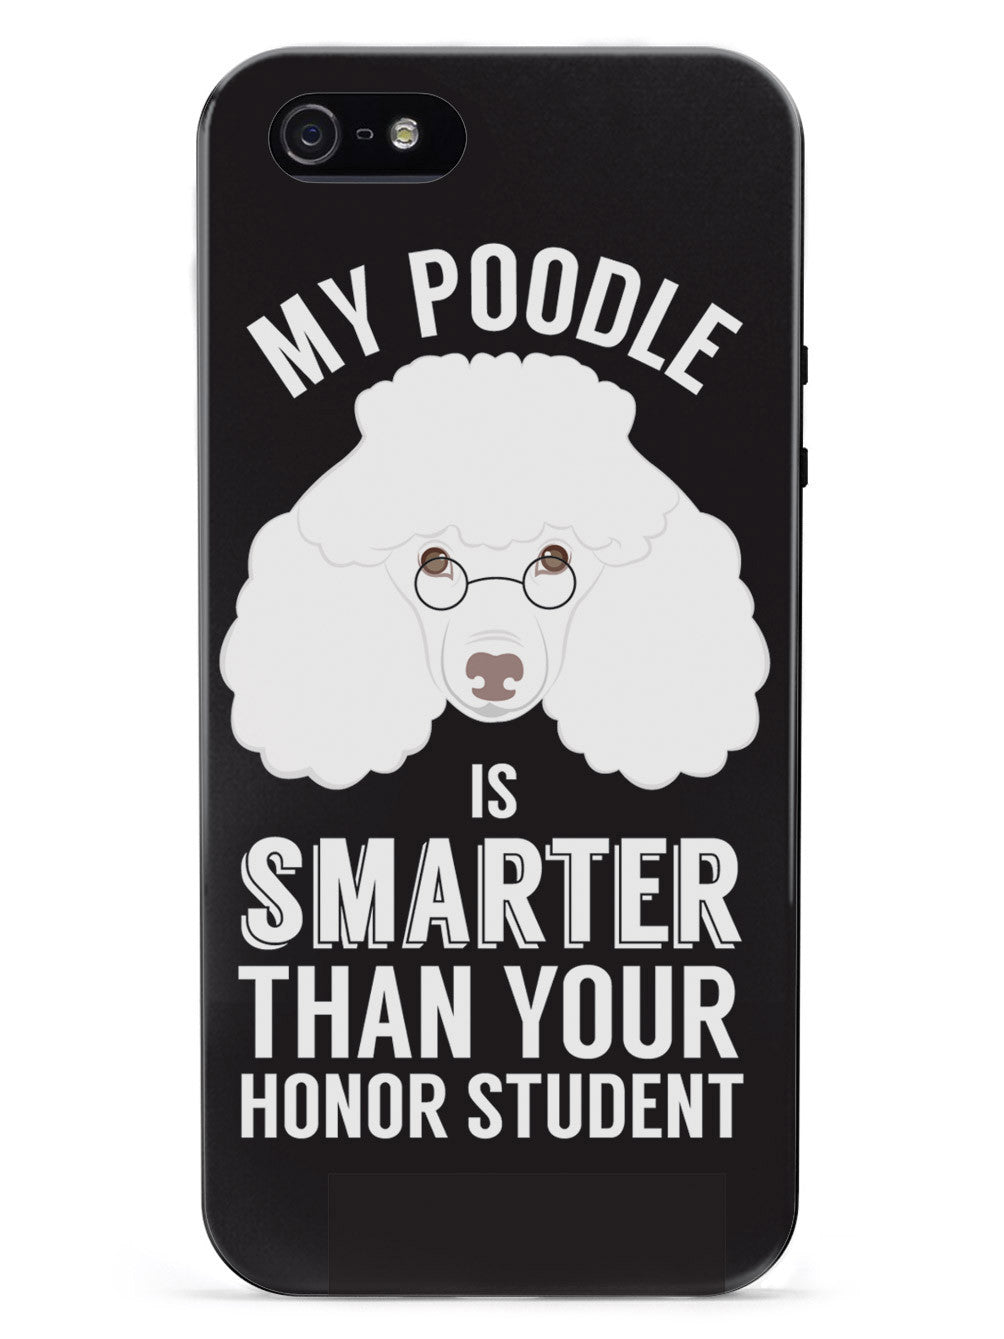 Smarter Than Your Honor Student - Poodle Case